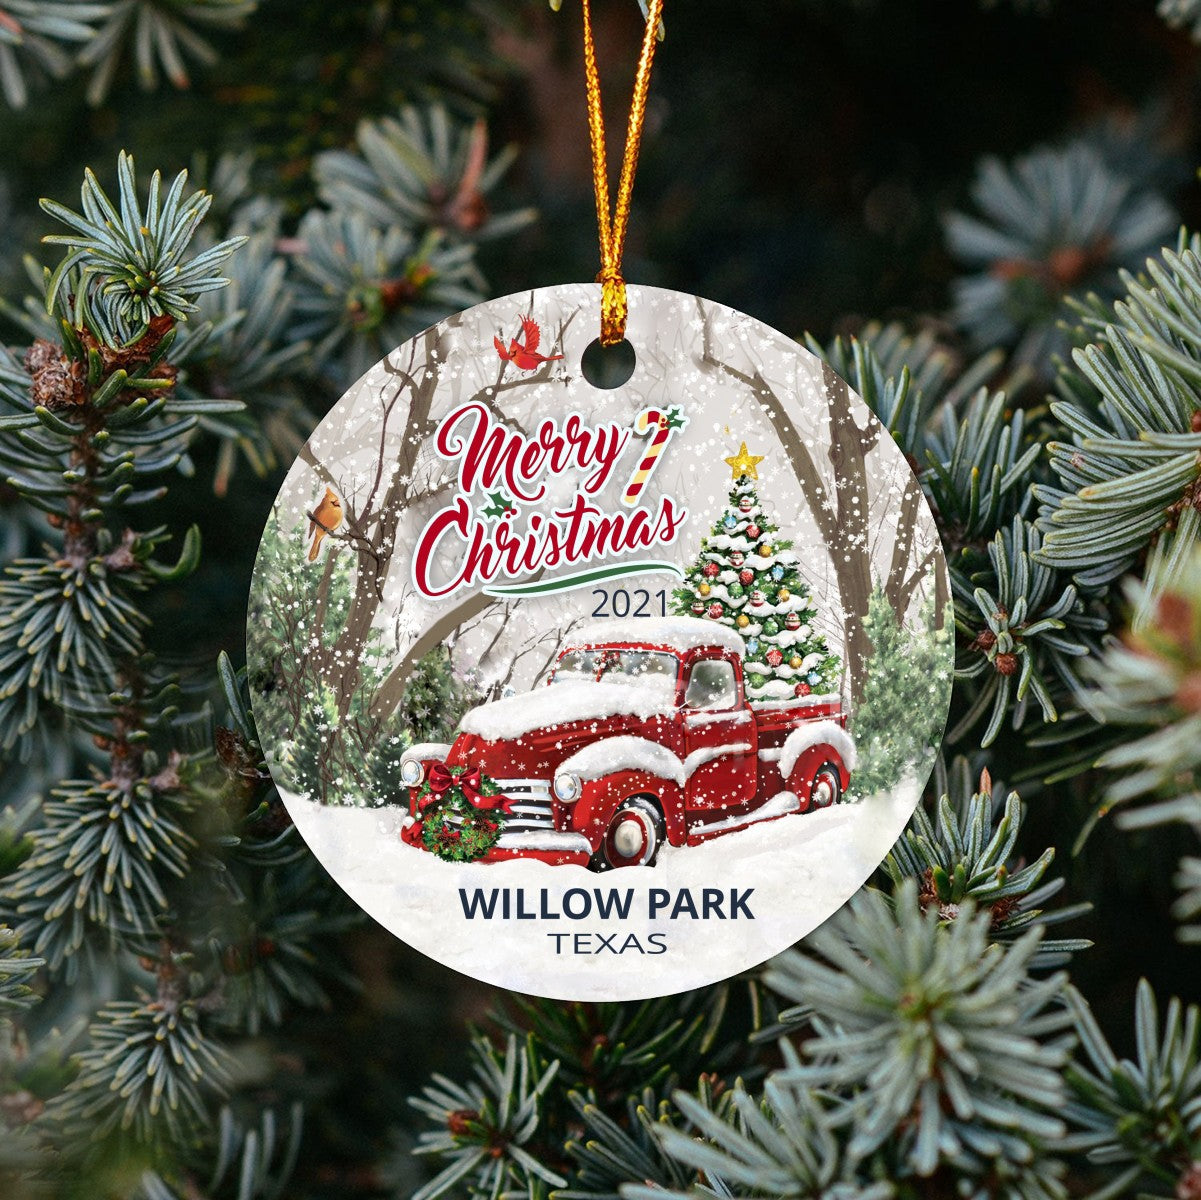 Christmas Tree Ornaments Willow Park - Ornament With Name City, State Willow Park Texas TX Ornament - Red Truck Xmas Ornaments 3'' Plastic Gift For Family, Friend And Housewarming